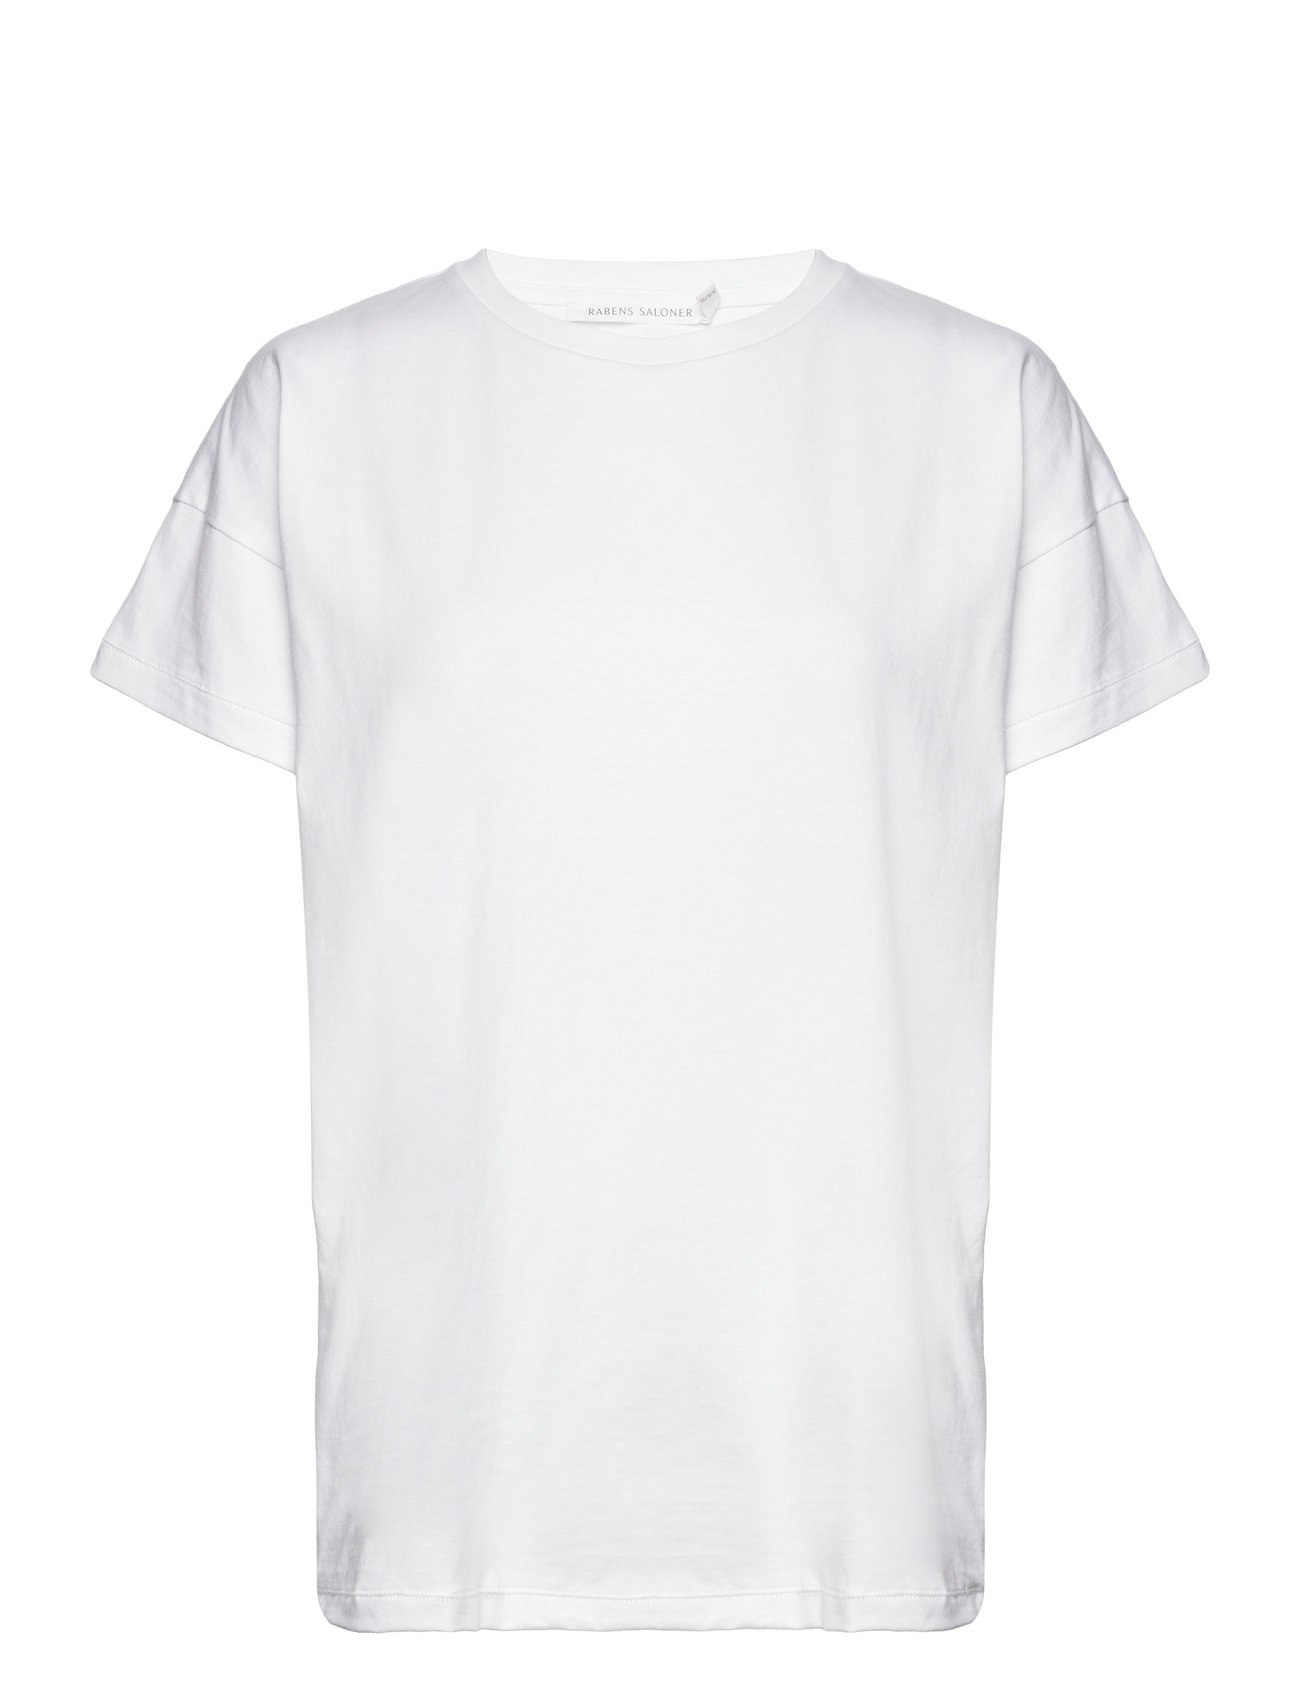 Cici Tops T-shirts & Tops Short-sleeved White Rabens Sal R